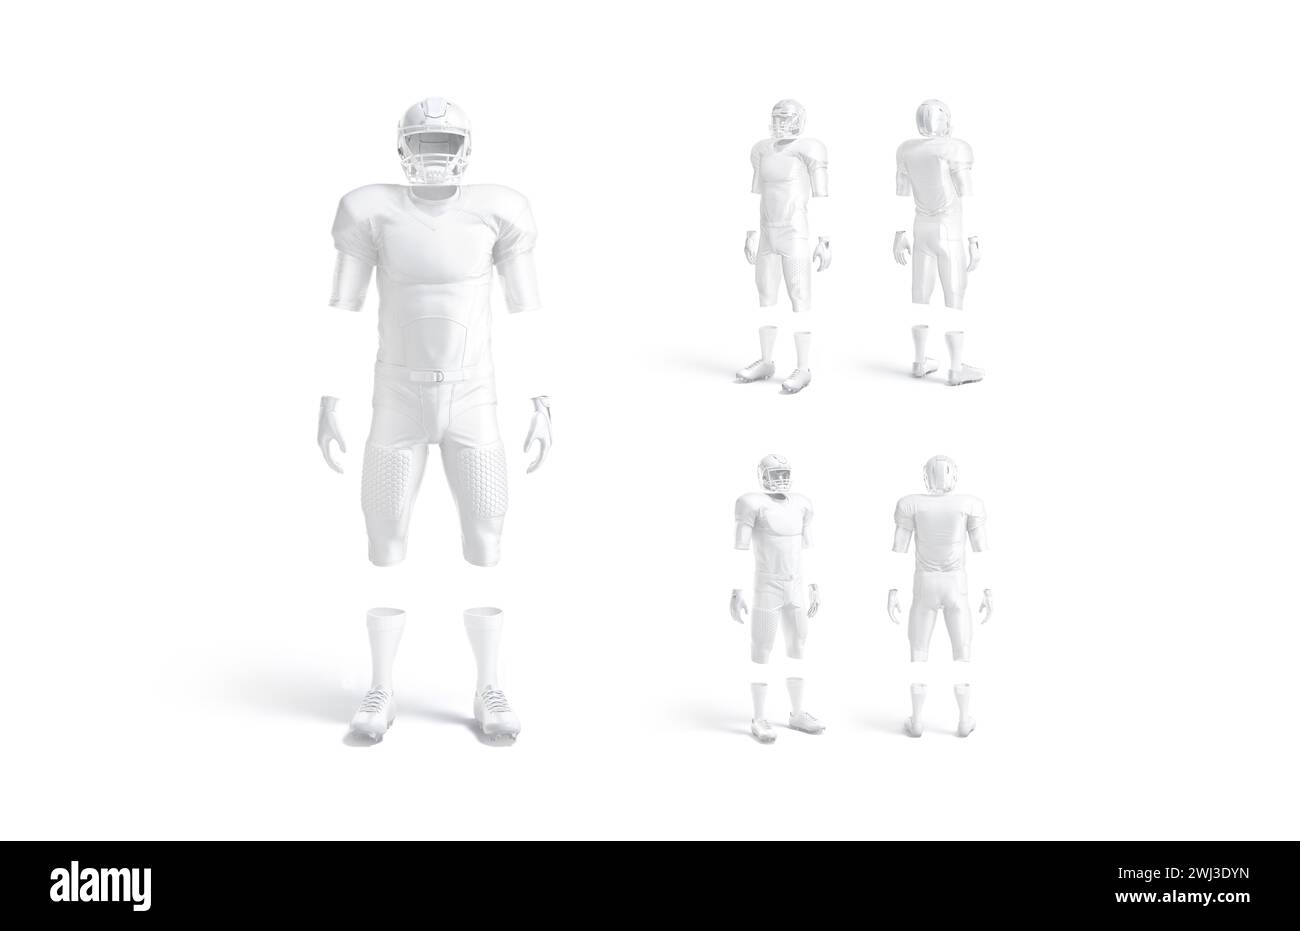 Blank white american football uniform mockup, different views, 3d rendering. Empty armour or protective clothing for rugby mock up, isolated. Clear pr Stock Photo